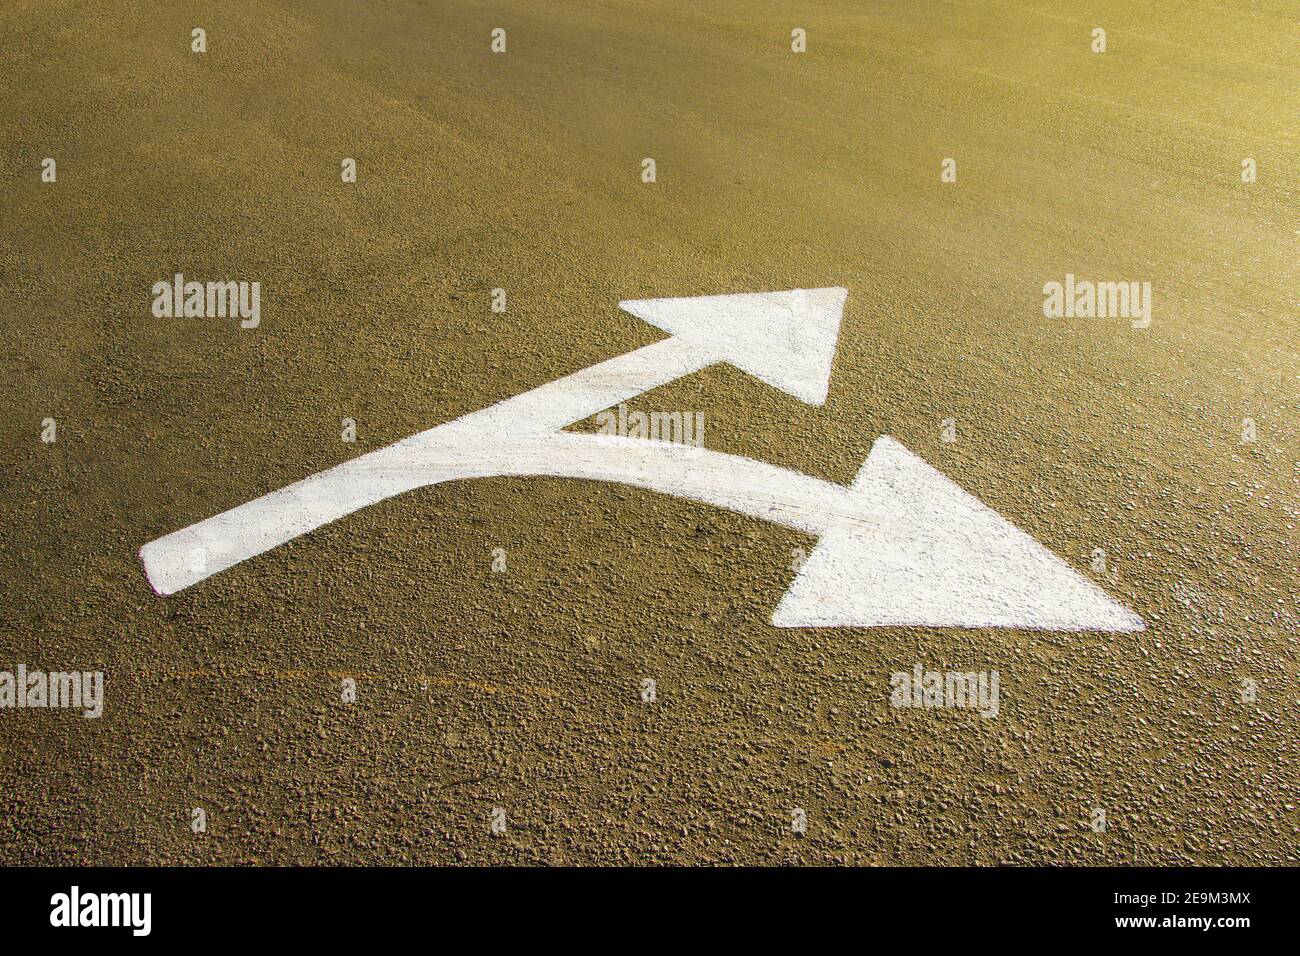 white directional arrow drawn on the asphalt ground - concept of paths and directions Stock Photo